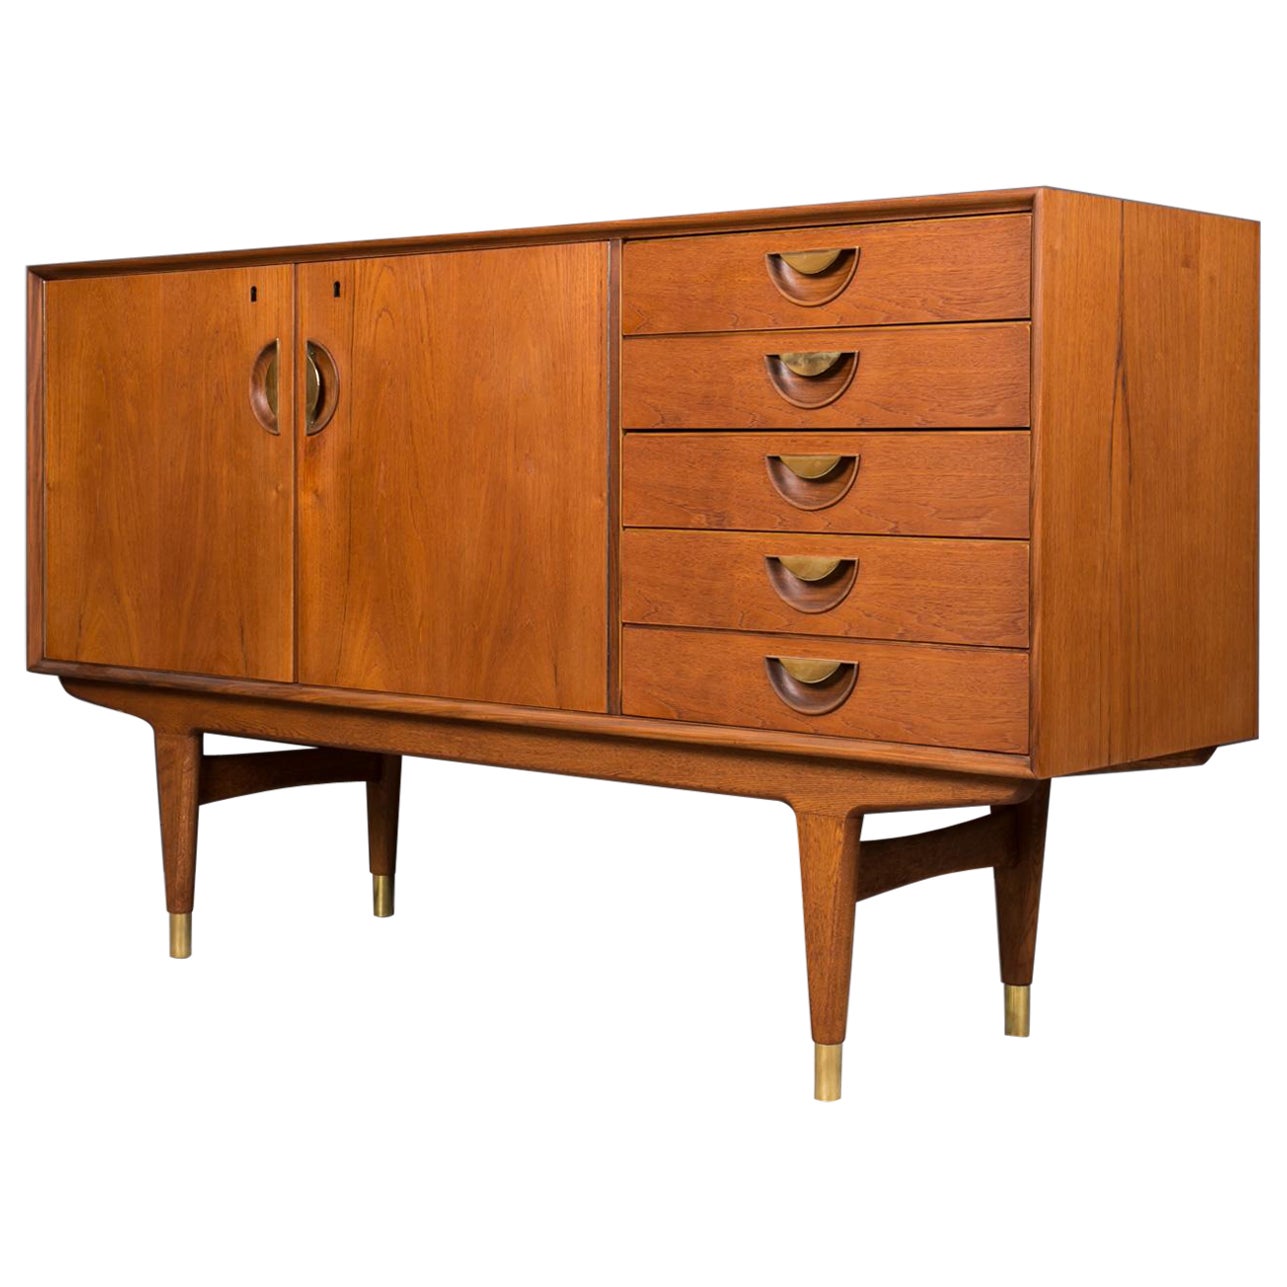 Midcentury Danish Sideboard, Teak Wood and Brass Details, 1950s For Sale